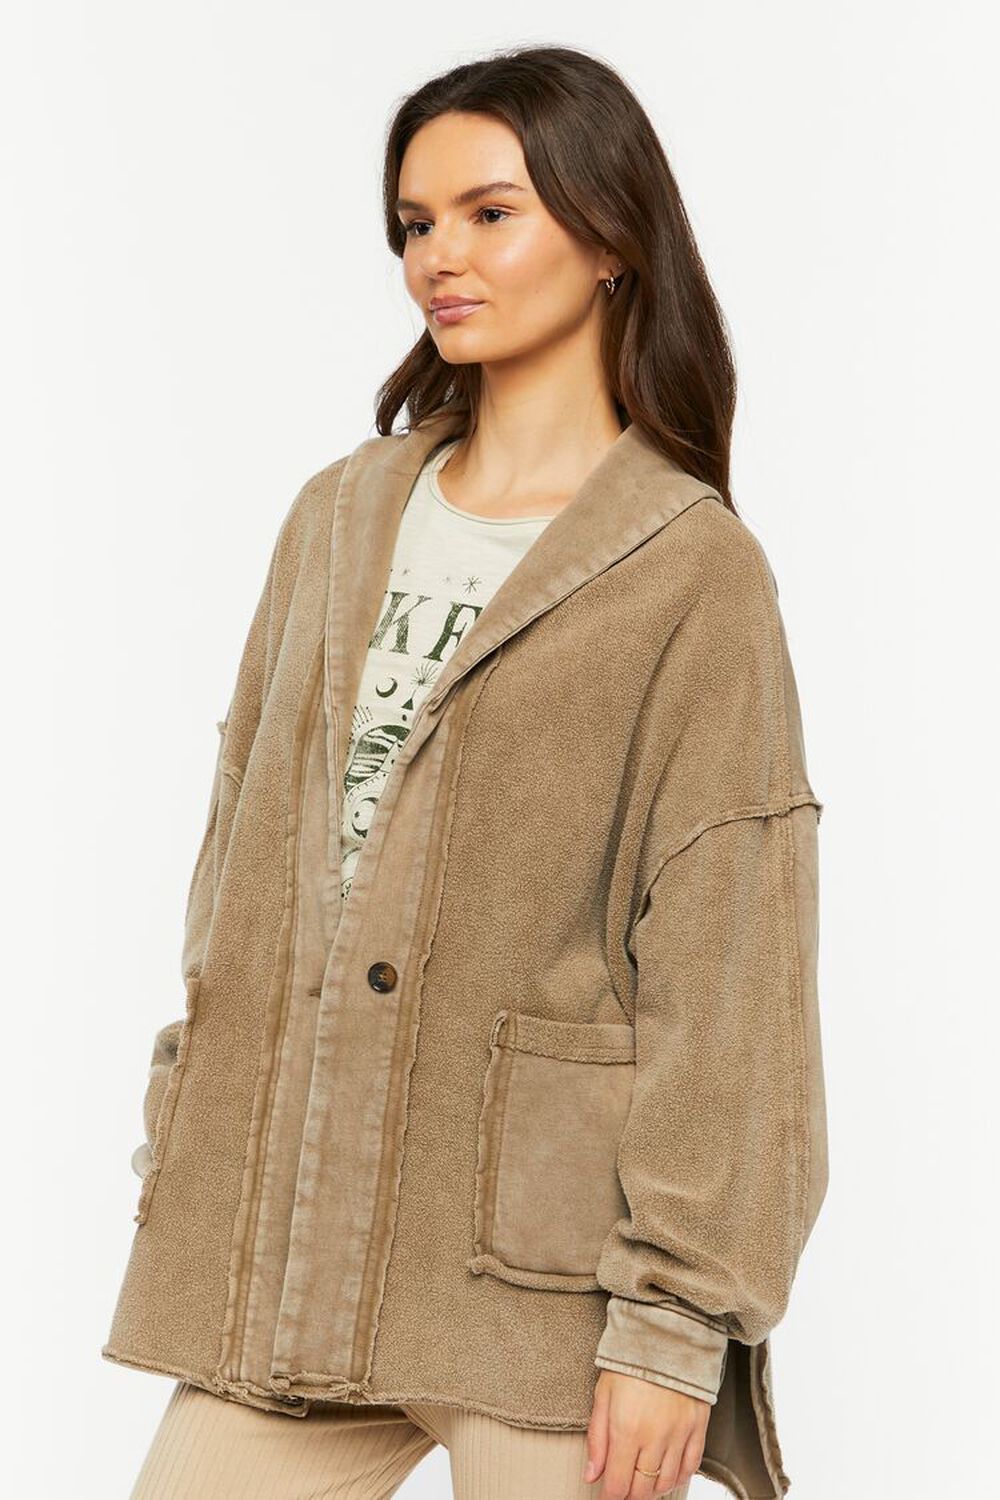 MOCHA French Terry Reverse High-Low Jacket, image 2